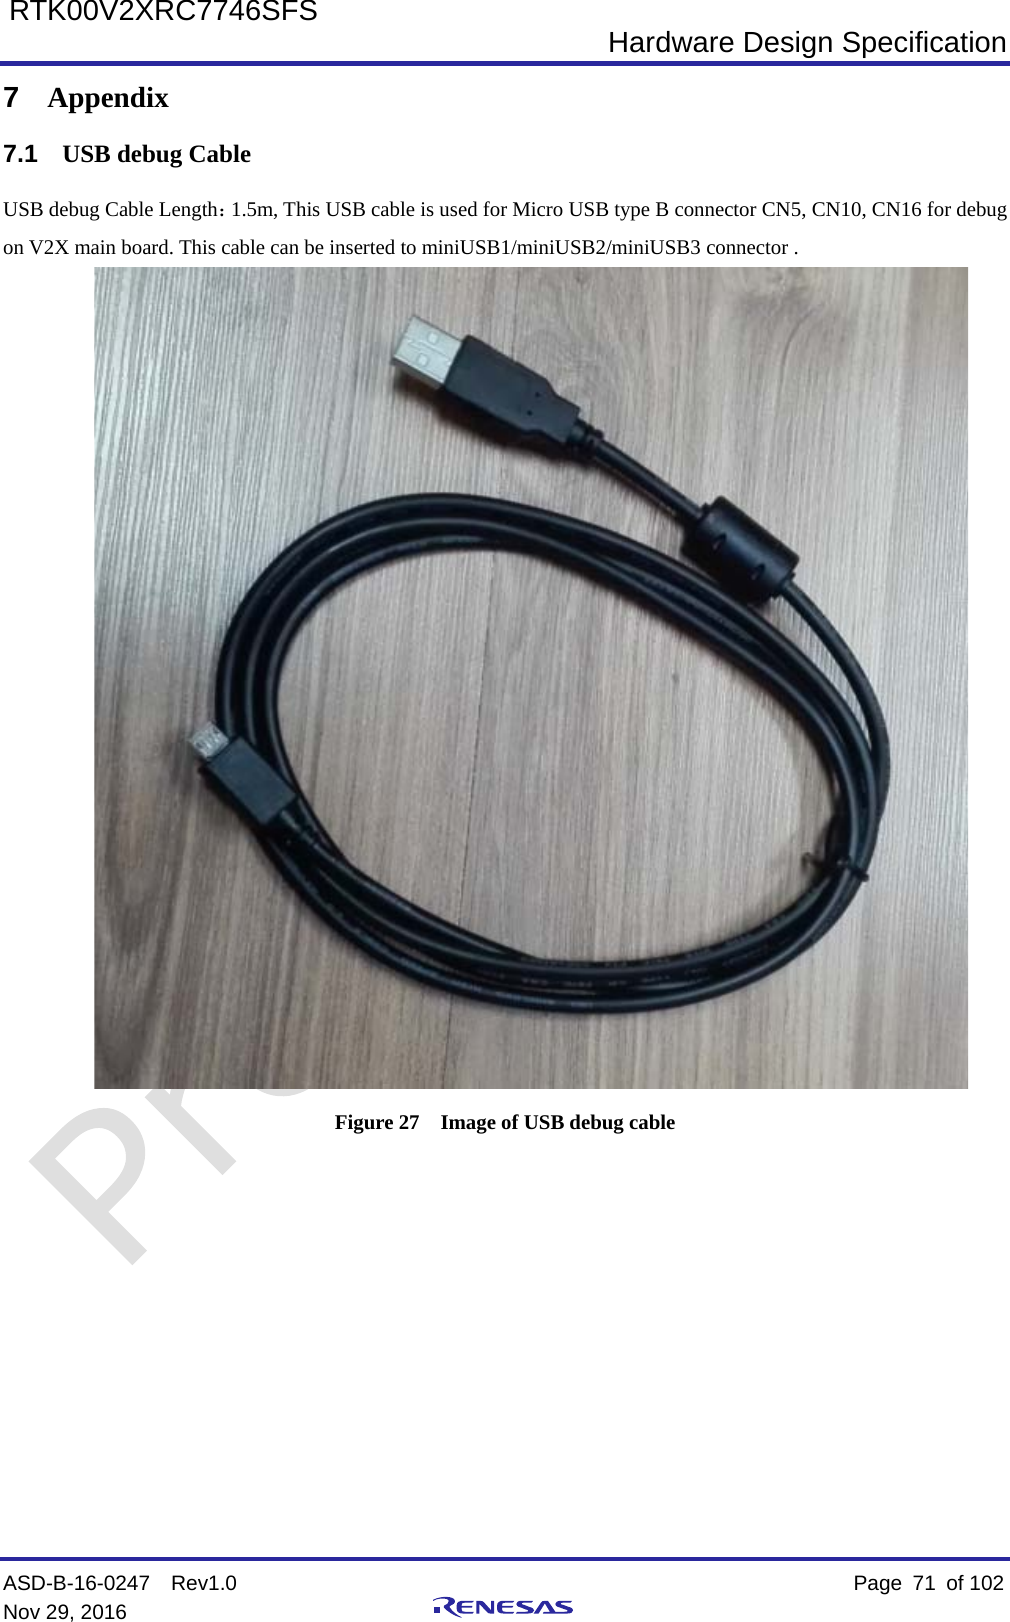  Hardware Design Specification ASD-B-16-0247  Rev1.0    Page  71 of 102 Nov 29, 2016     RTK00V2XRC7746SFS 7  Appendix 7.1 USB debug Cable USB debug Cable Length：1.5m, This USB cable is used for Micro USB type B connector CN5, CN10, CN16 for debug on V2X main board. This cable can be inserted to miniUSB1/miniUSB2/miniUSB3 connector .  Figure 27  Image of USB debug cable     